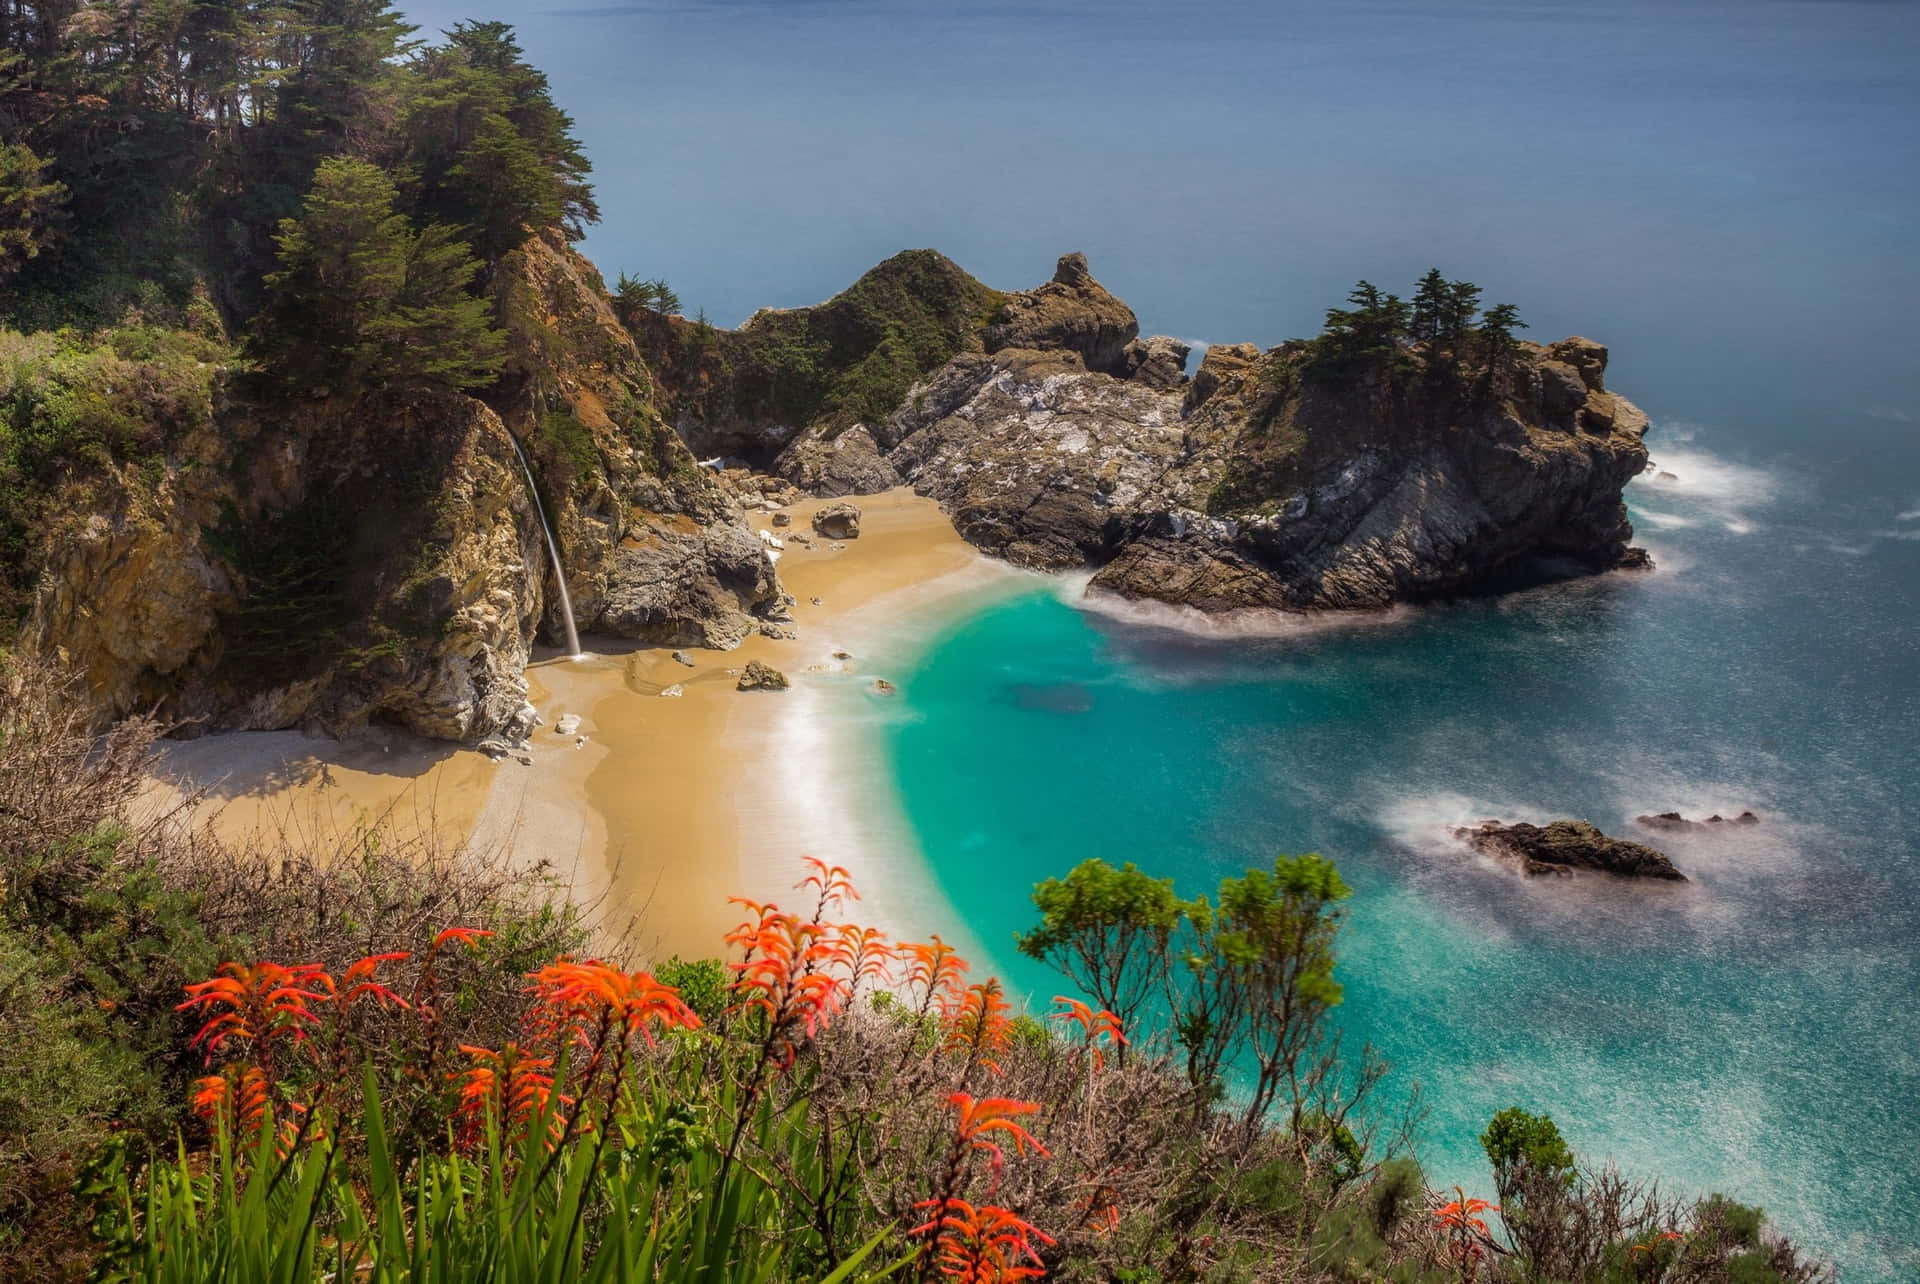 A panoramic view of the breathtaking Big Sur coastline in California.